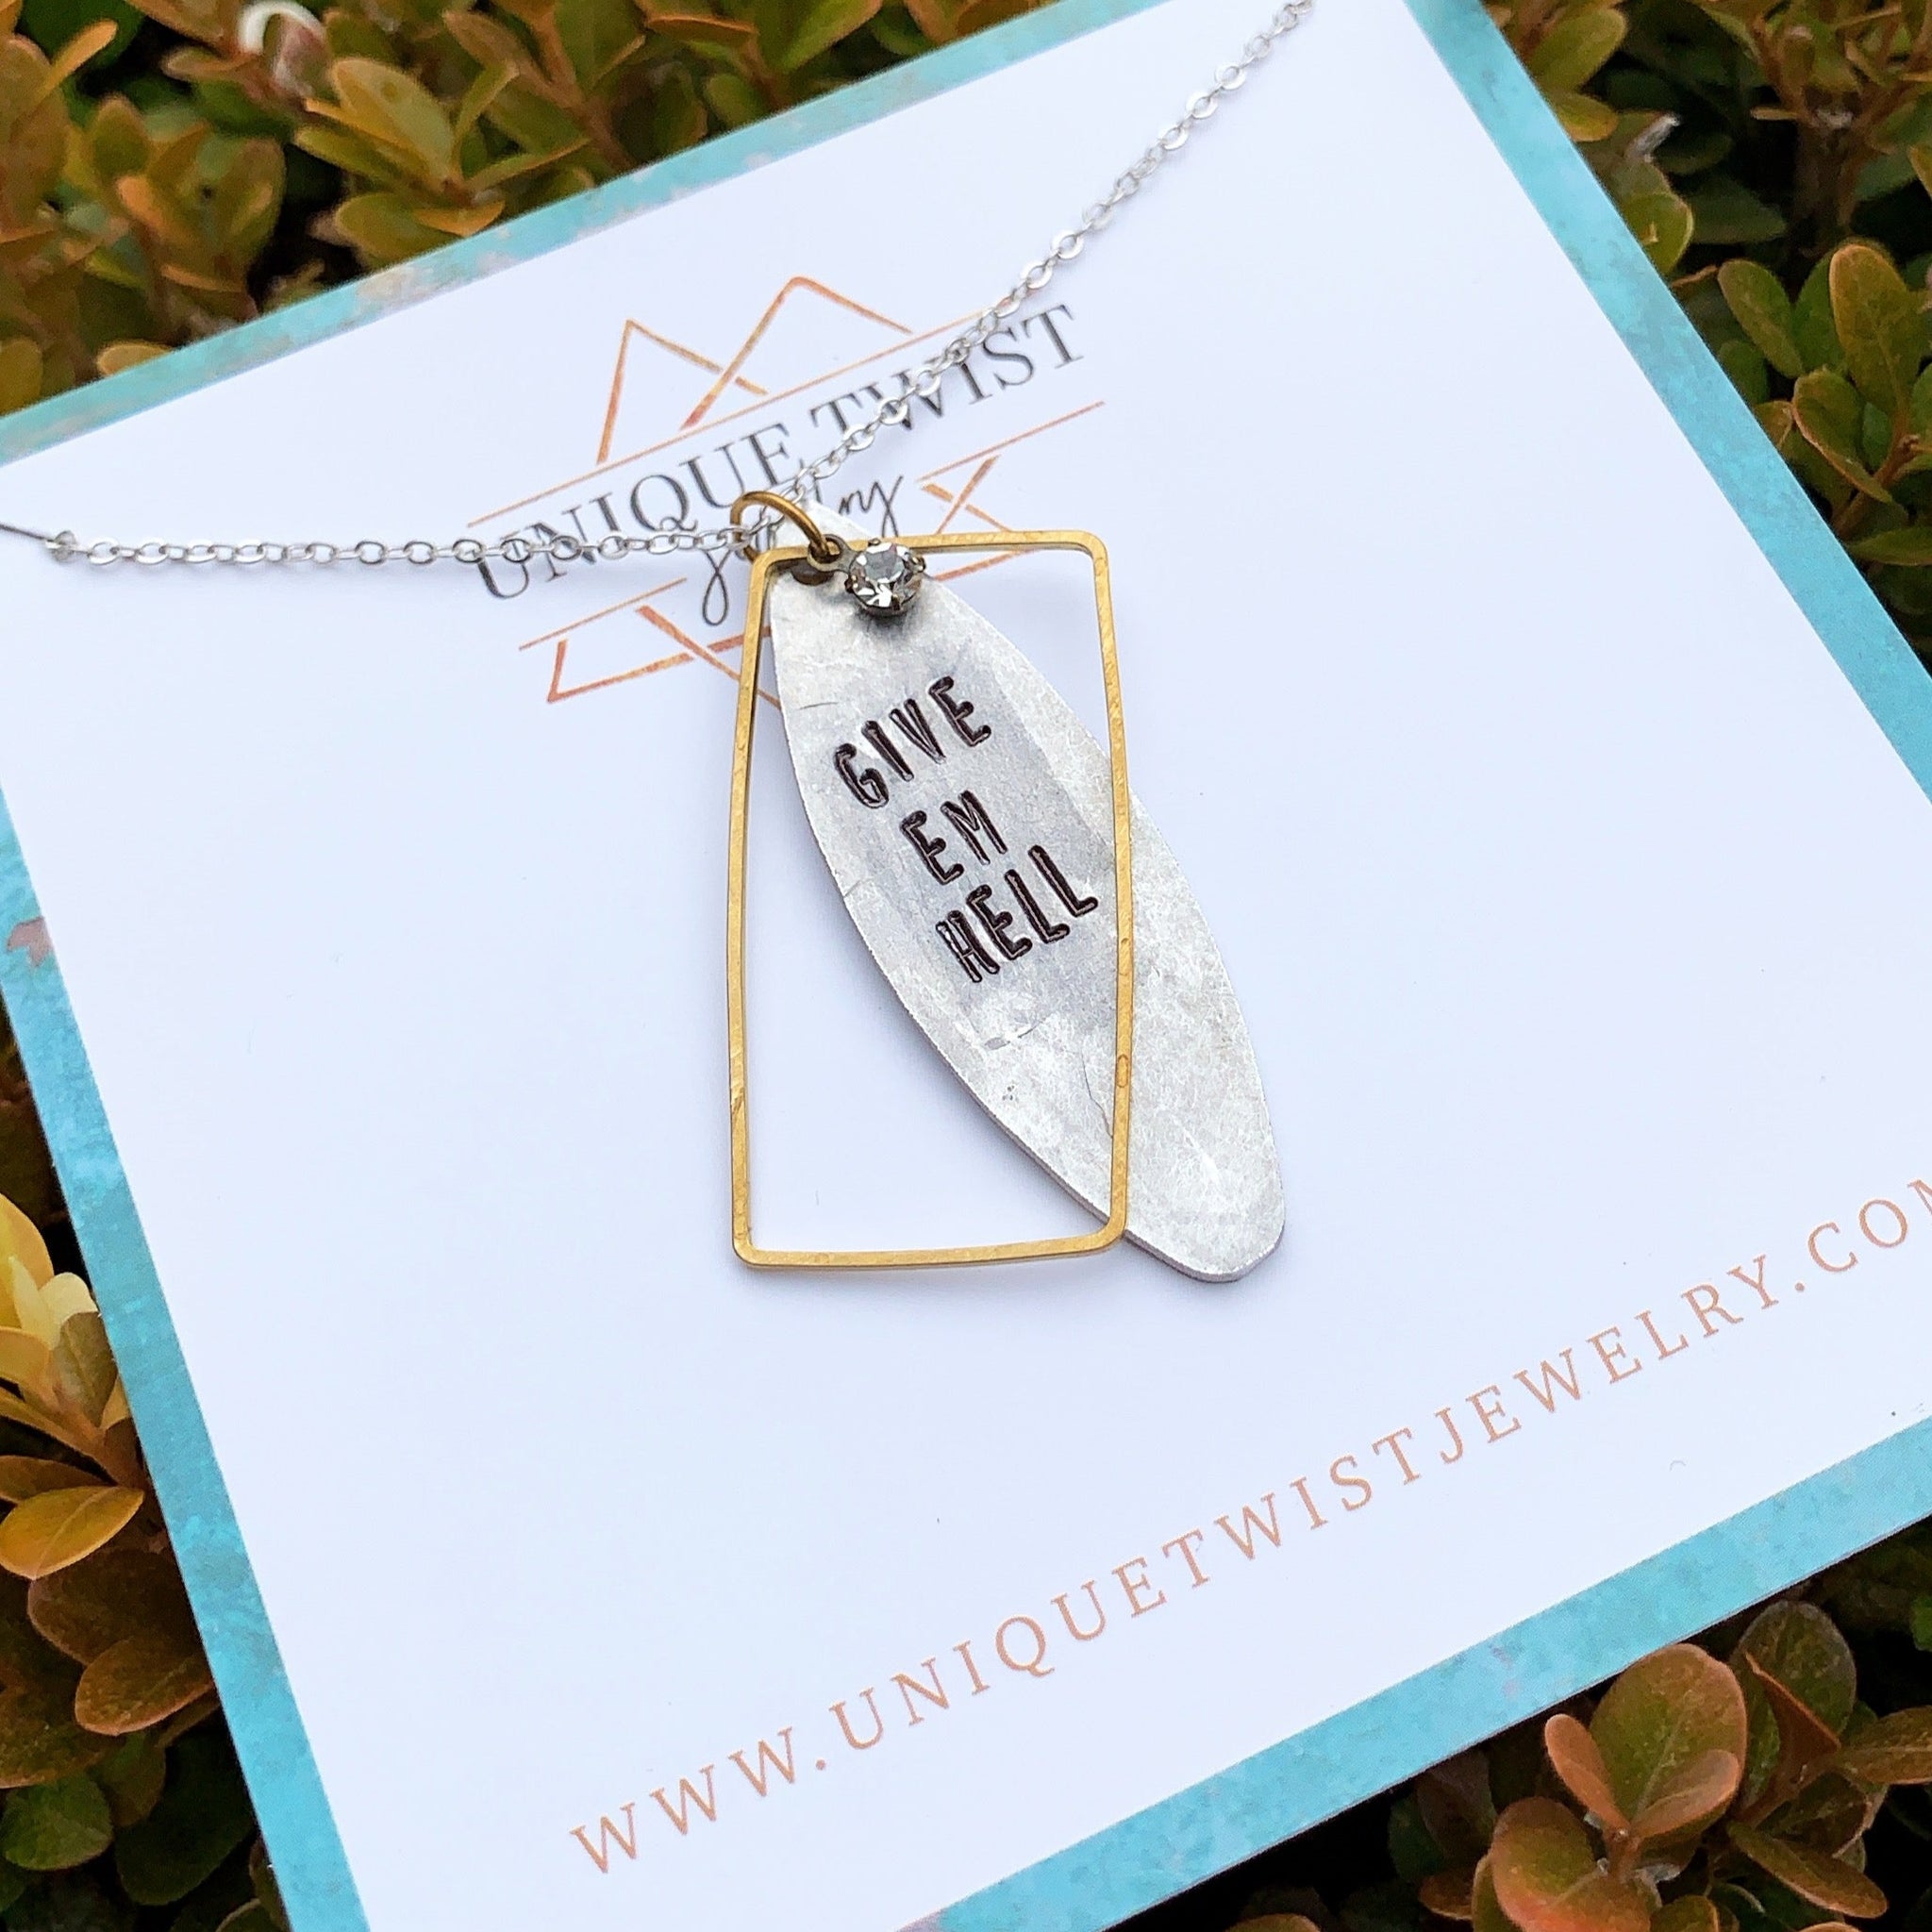 Give em hell Hand-Stamped Necklace. Handmade jewelry by Unique Twist Jewelry.